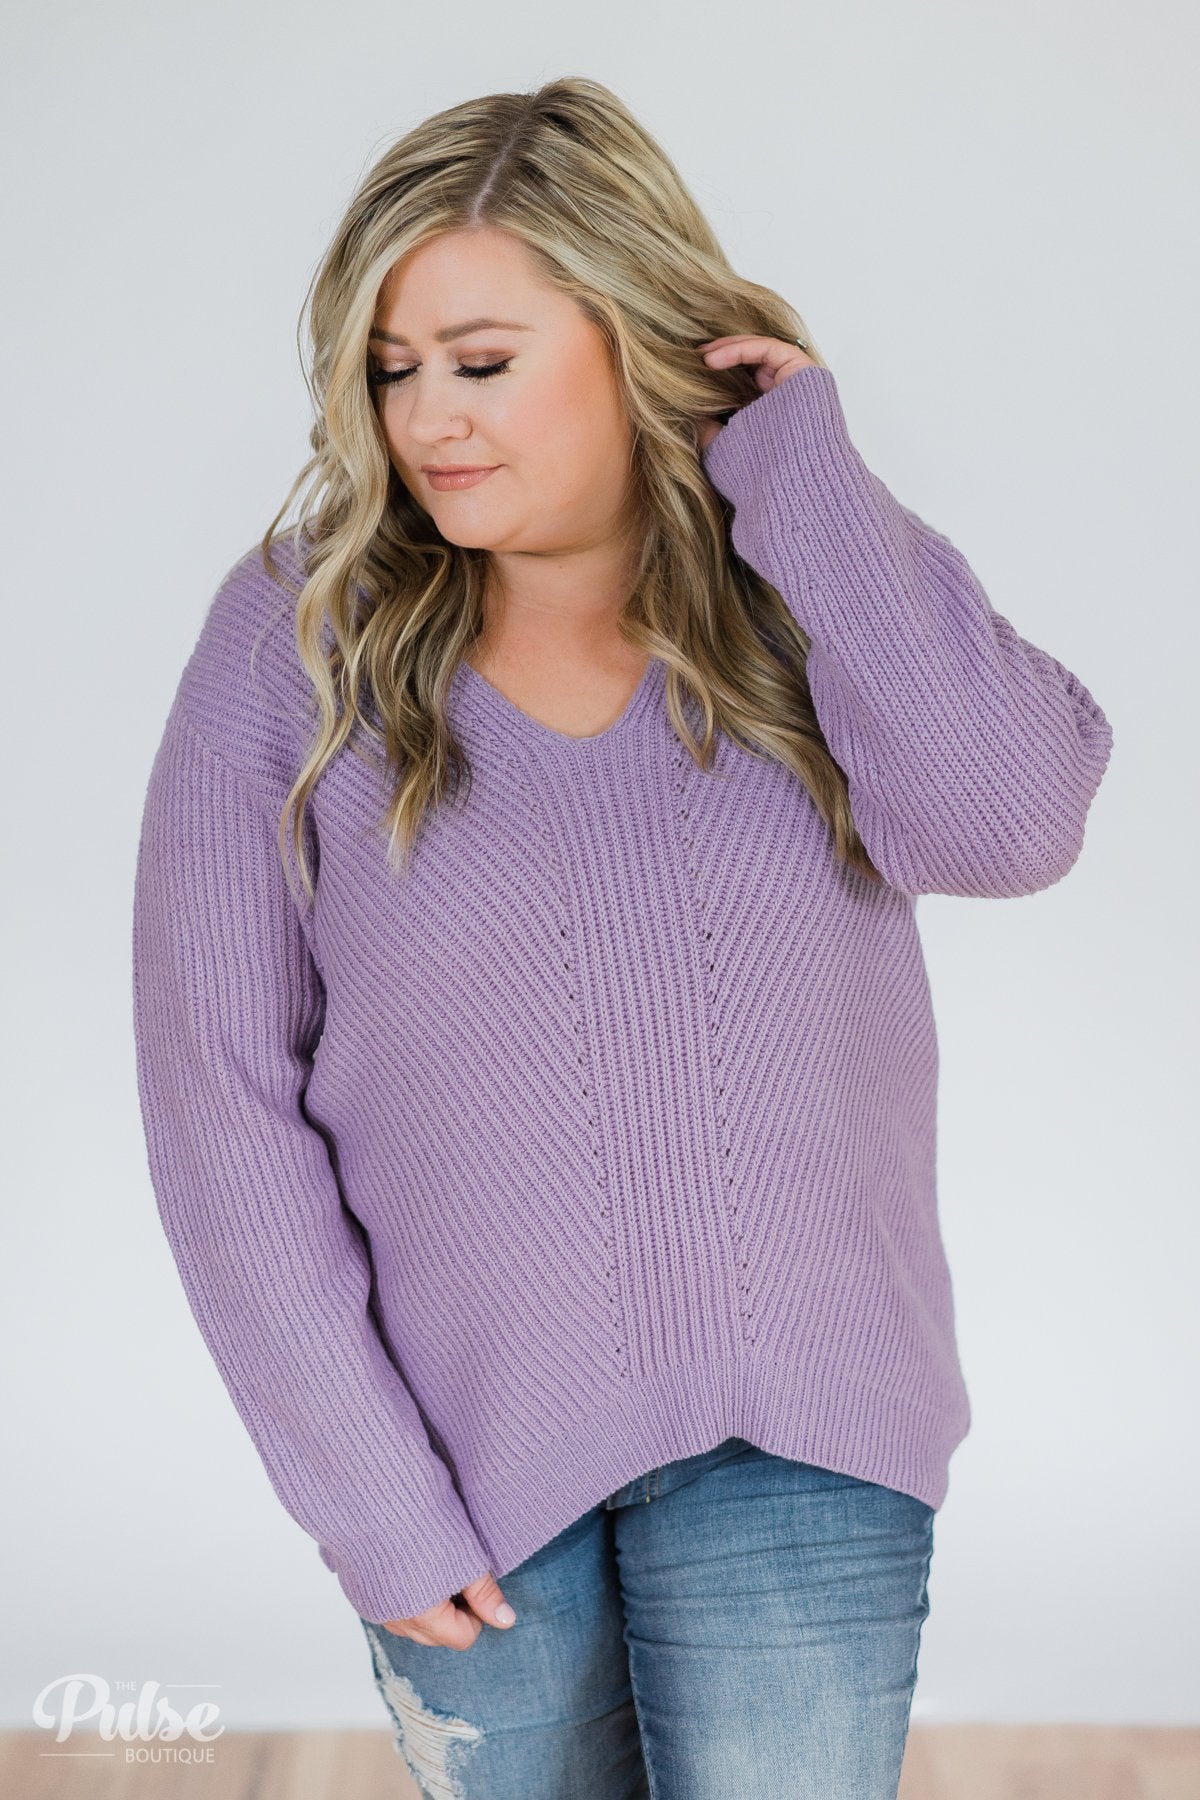 Lavender Fields Knitted Sweater – The Pulse Boutique